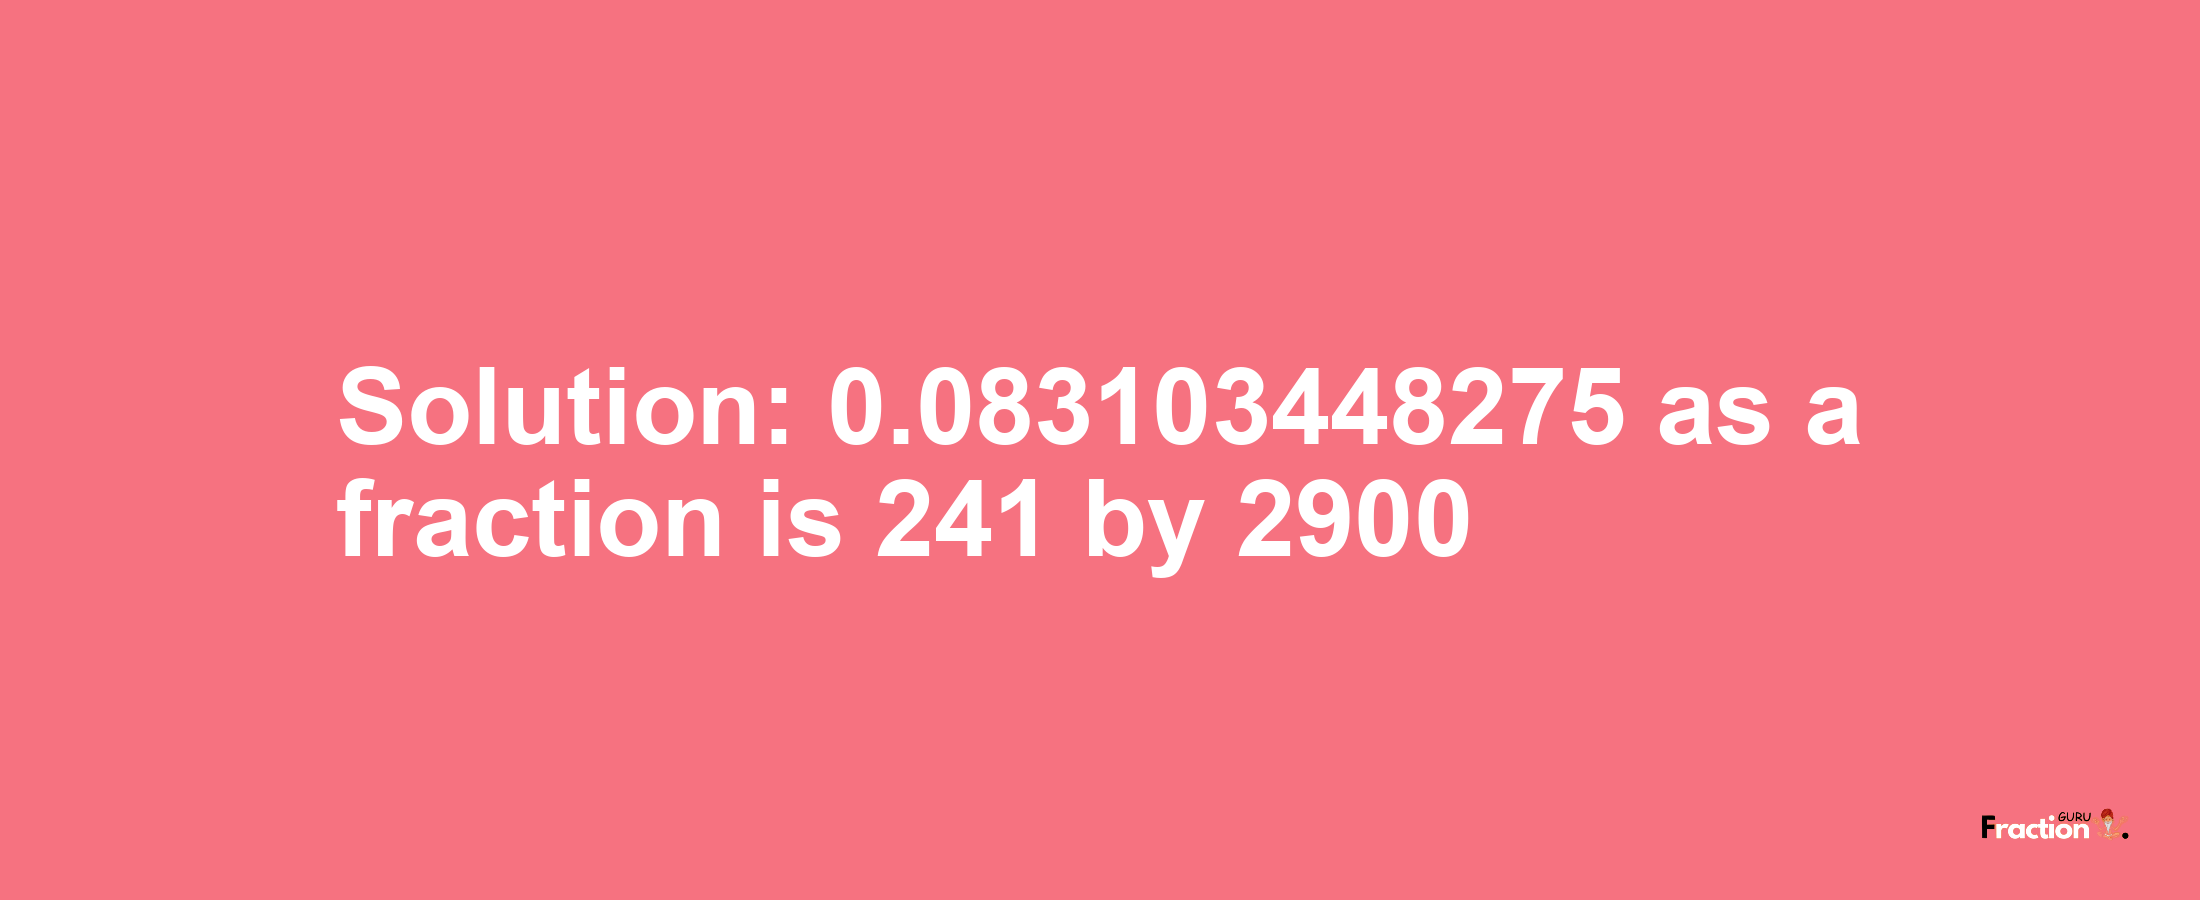 Solution:0.083103448275 as a fraction is 241/2900